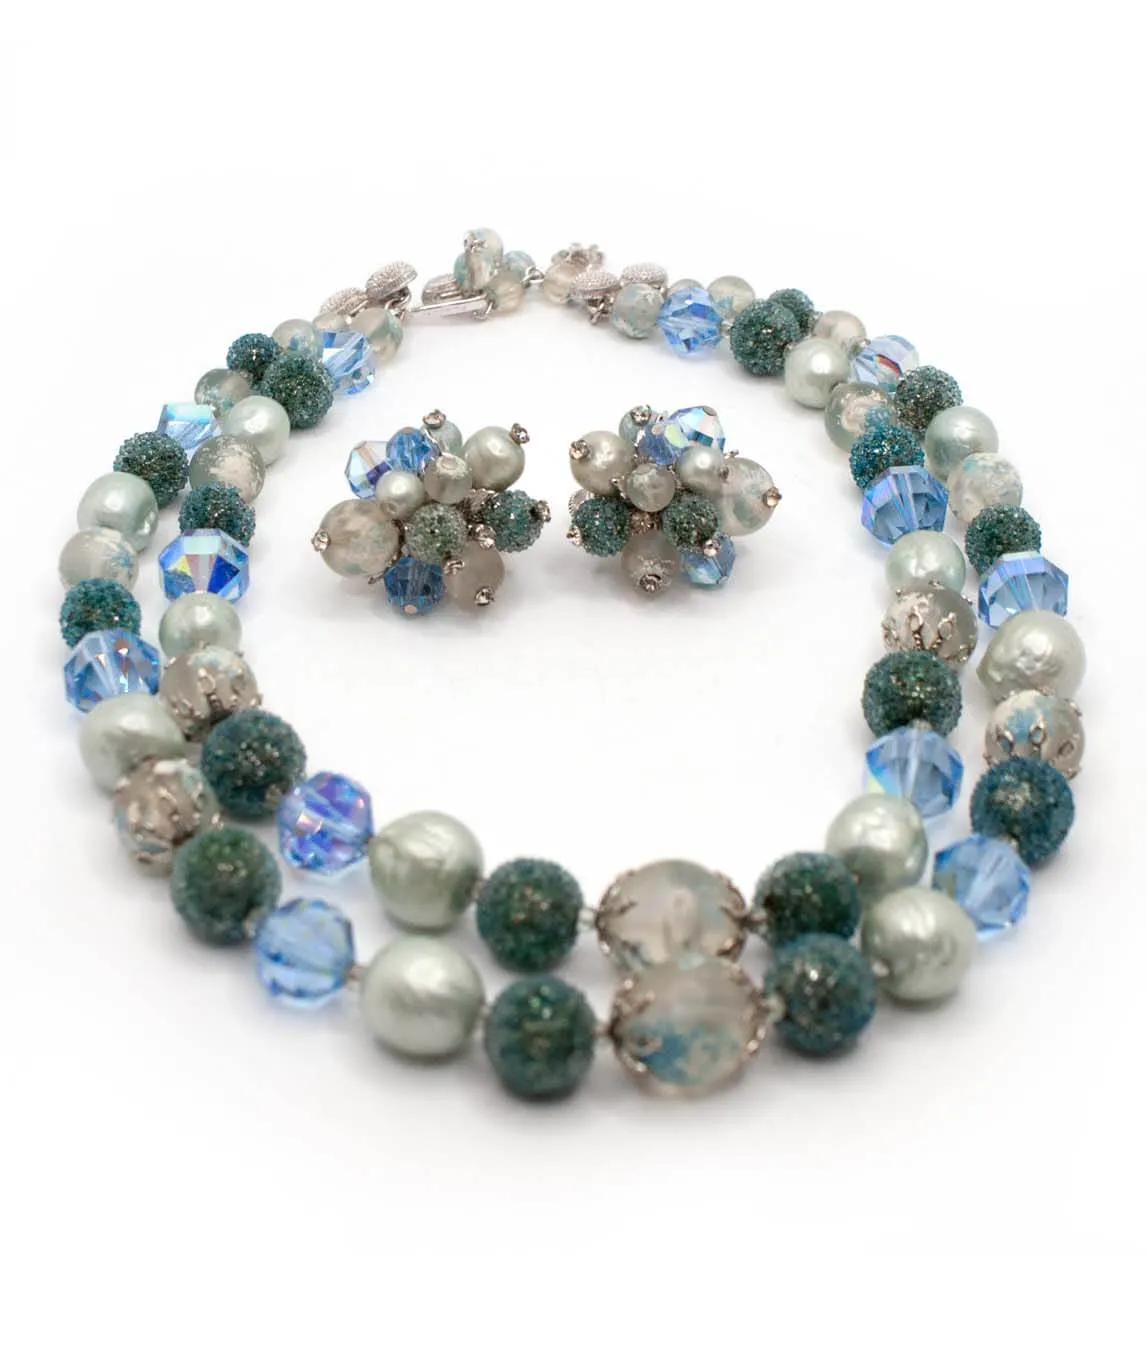 Vendôme Necklace and Earrings blue green clear and white beads